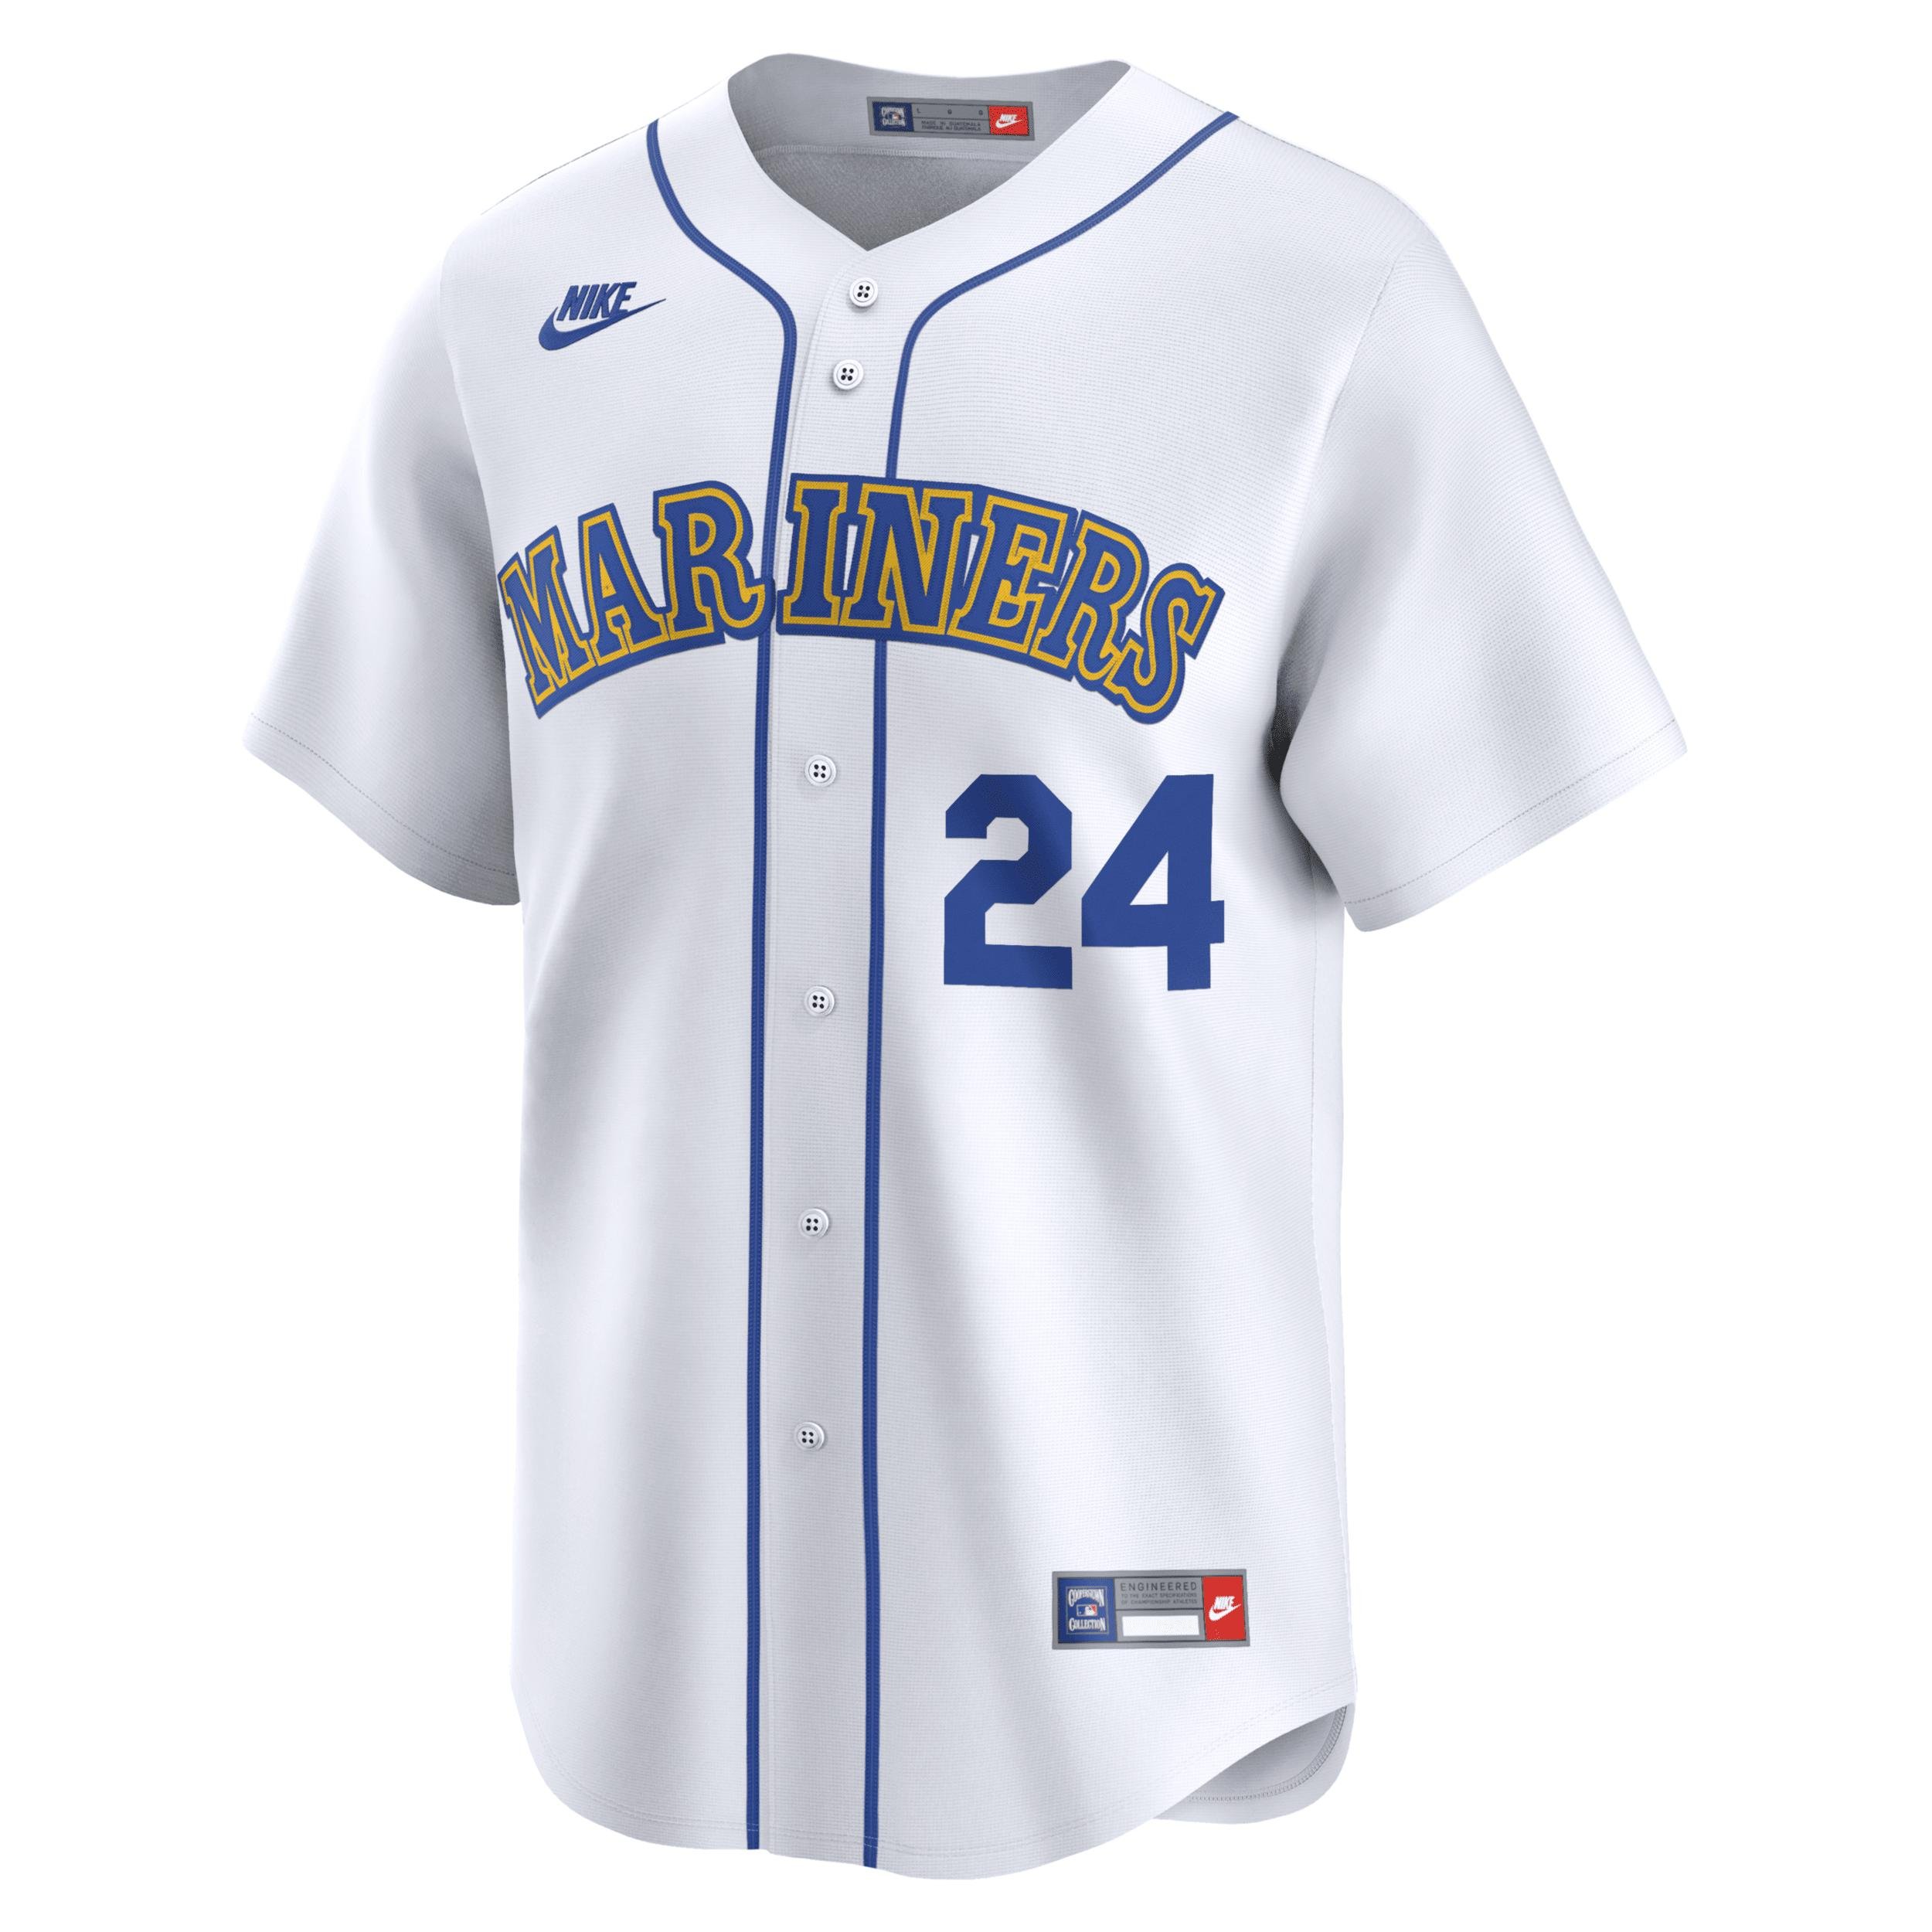 Ken Griffey Jr. Seattle Mariners Cooperstown Nike Men's Dri-FIT ADV MLB Limited Jersey by NIKE